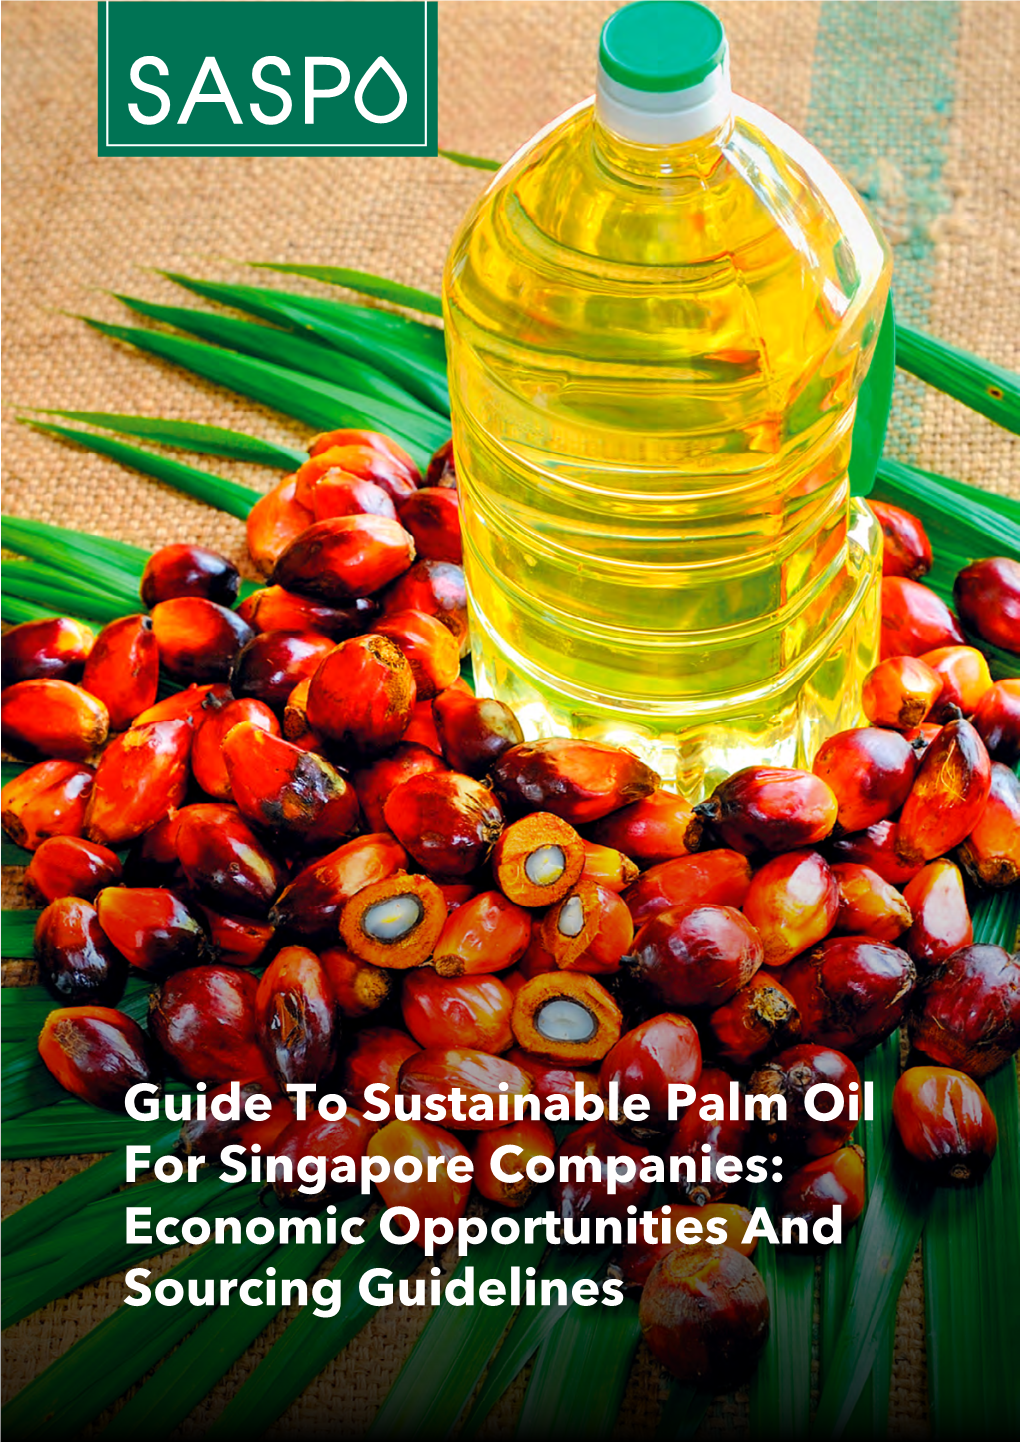 Guide to Sustainable Palm Oil for Singapore Companies: Economic Opportunities and Sourcing Guidelines Acknowledgements